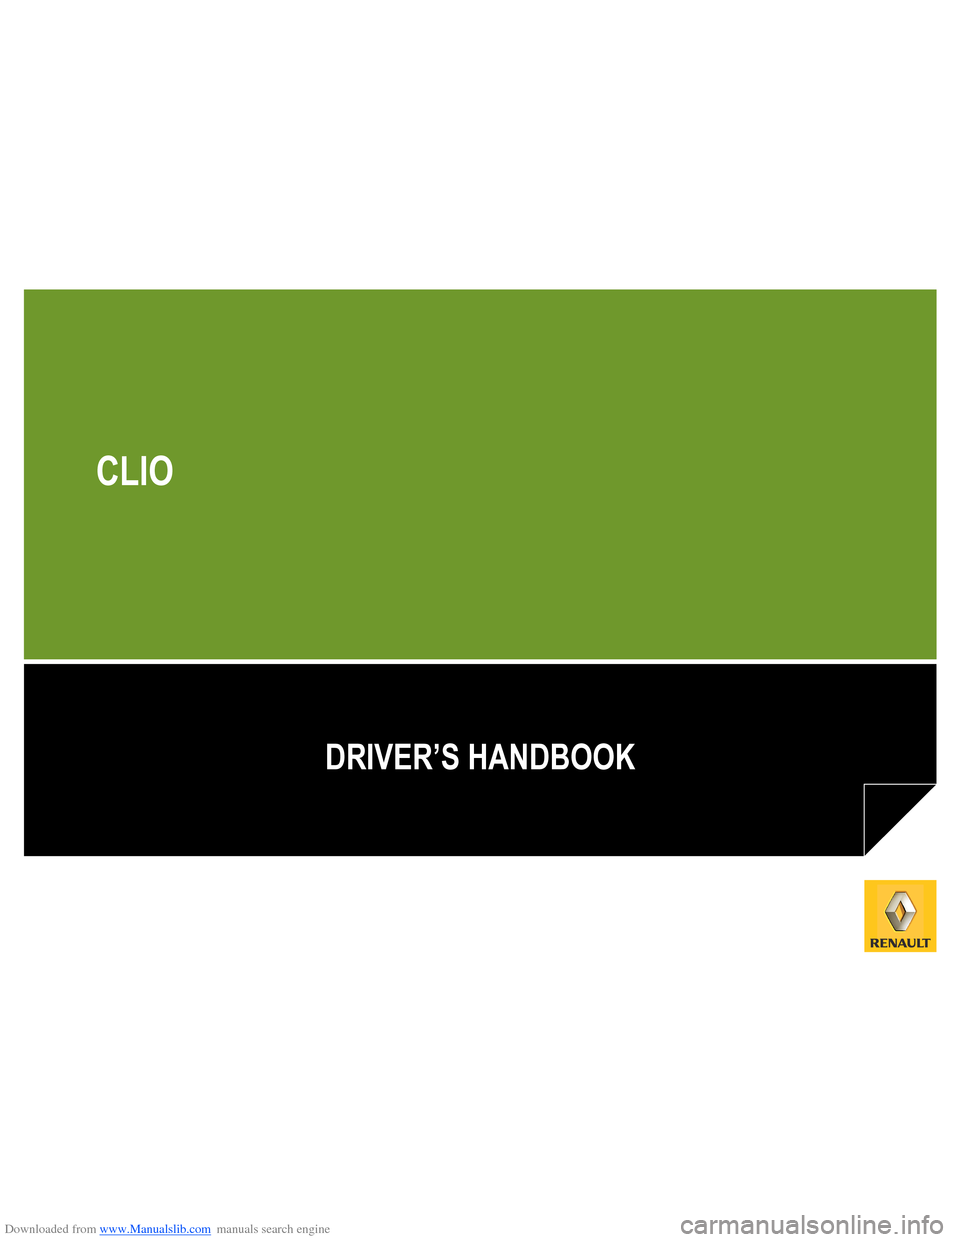 RENAULT CLIO 2012 X85 / 3.G Owners Manual Downloaded from www.Manualslib.com manuals search engine 
DRIVER’S HANDBOOK
CLIO  